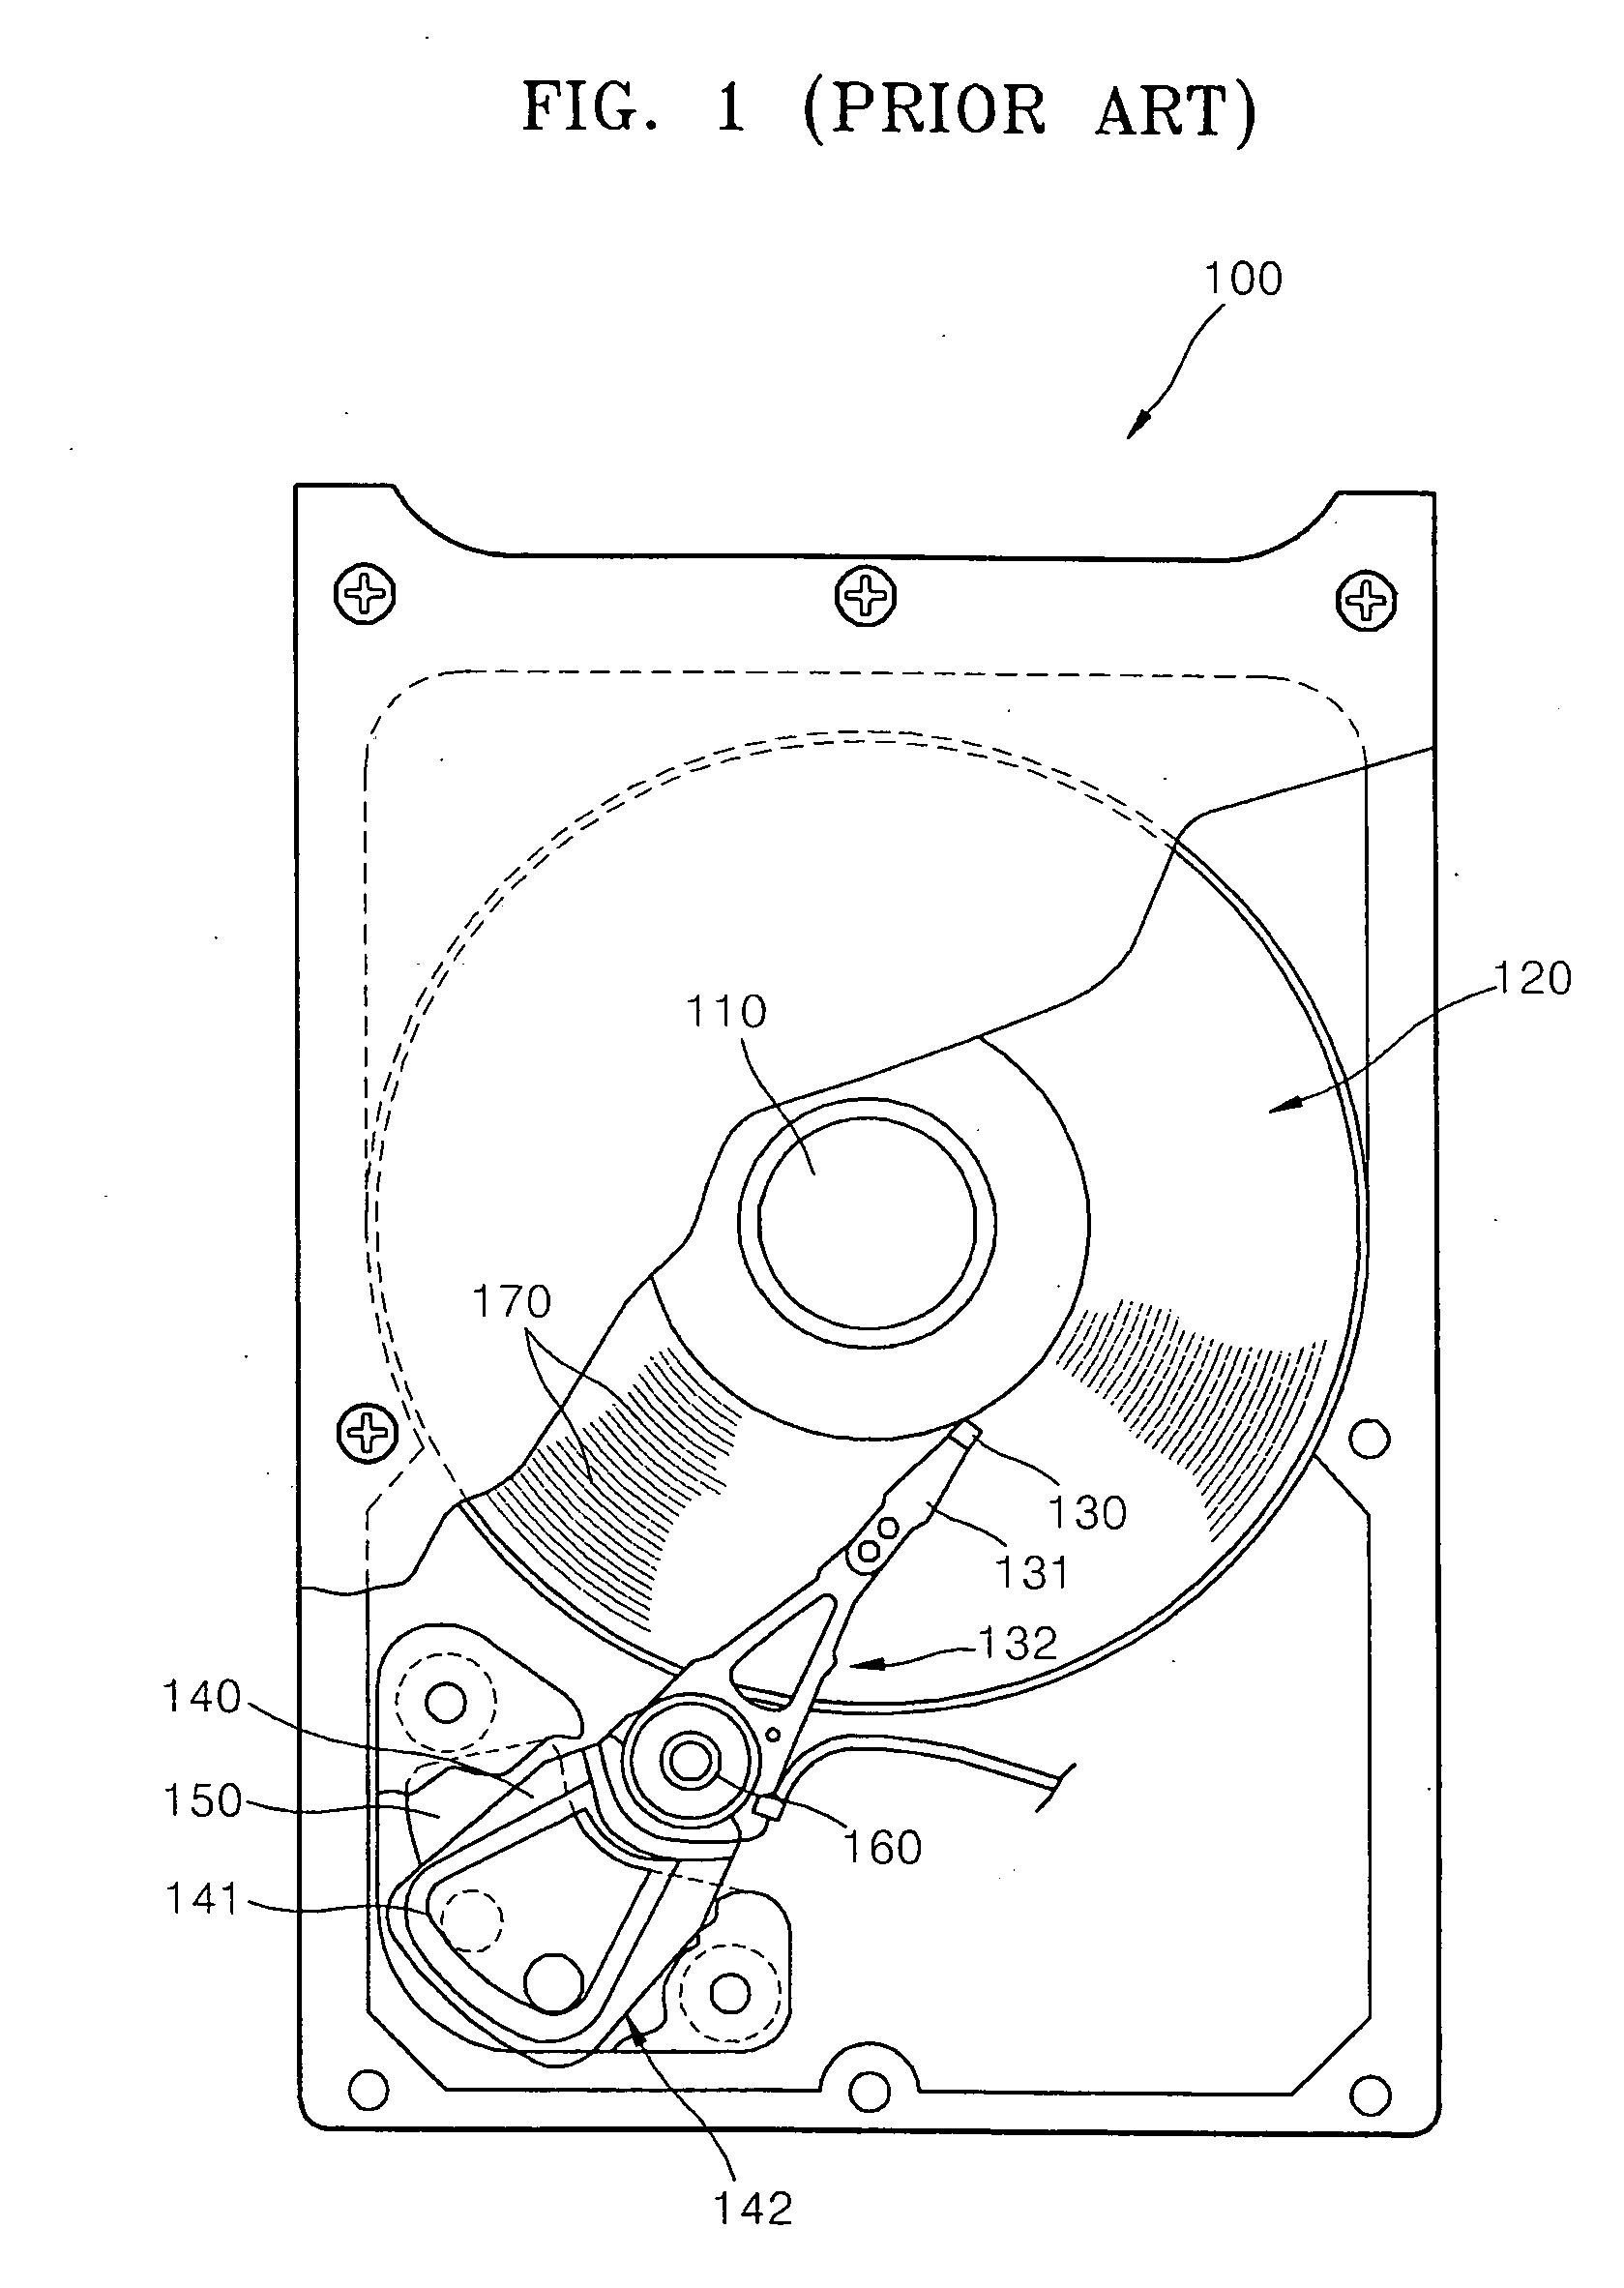 Hybrid disk drive and method of controlling data therein